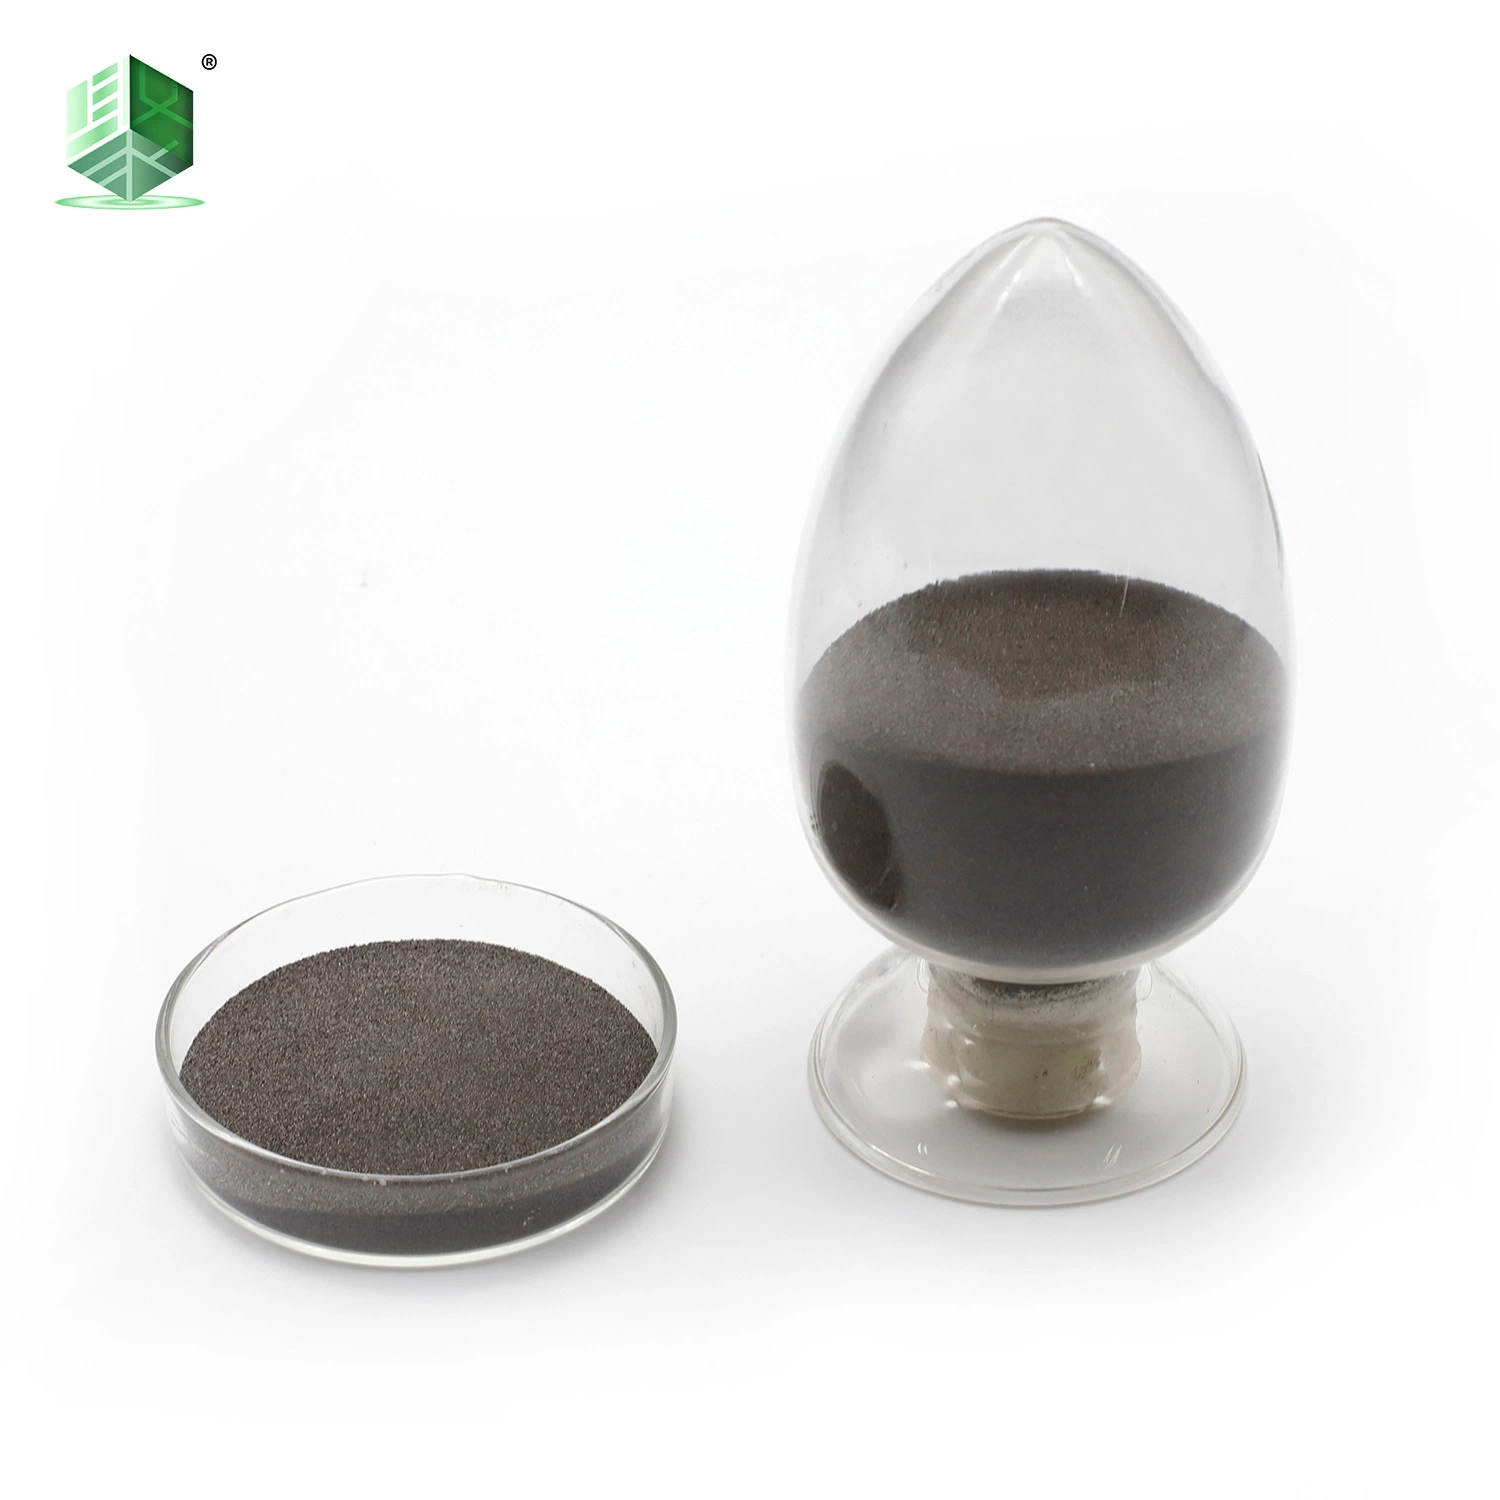 Tungsten Metal Powder From China for High Density Radiation Resistant Materials